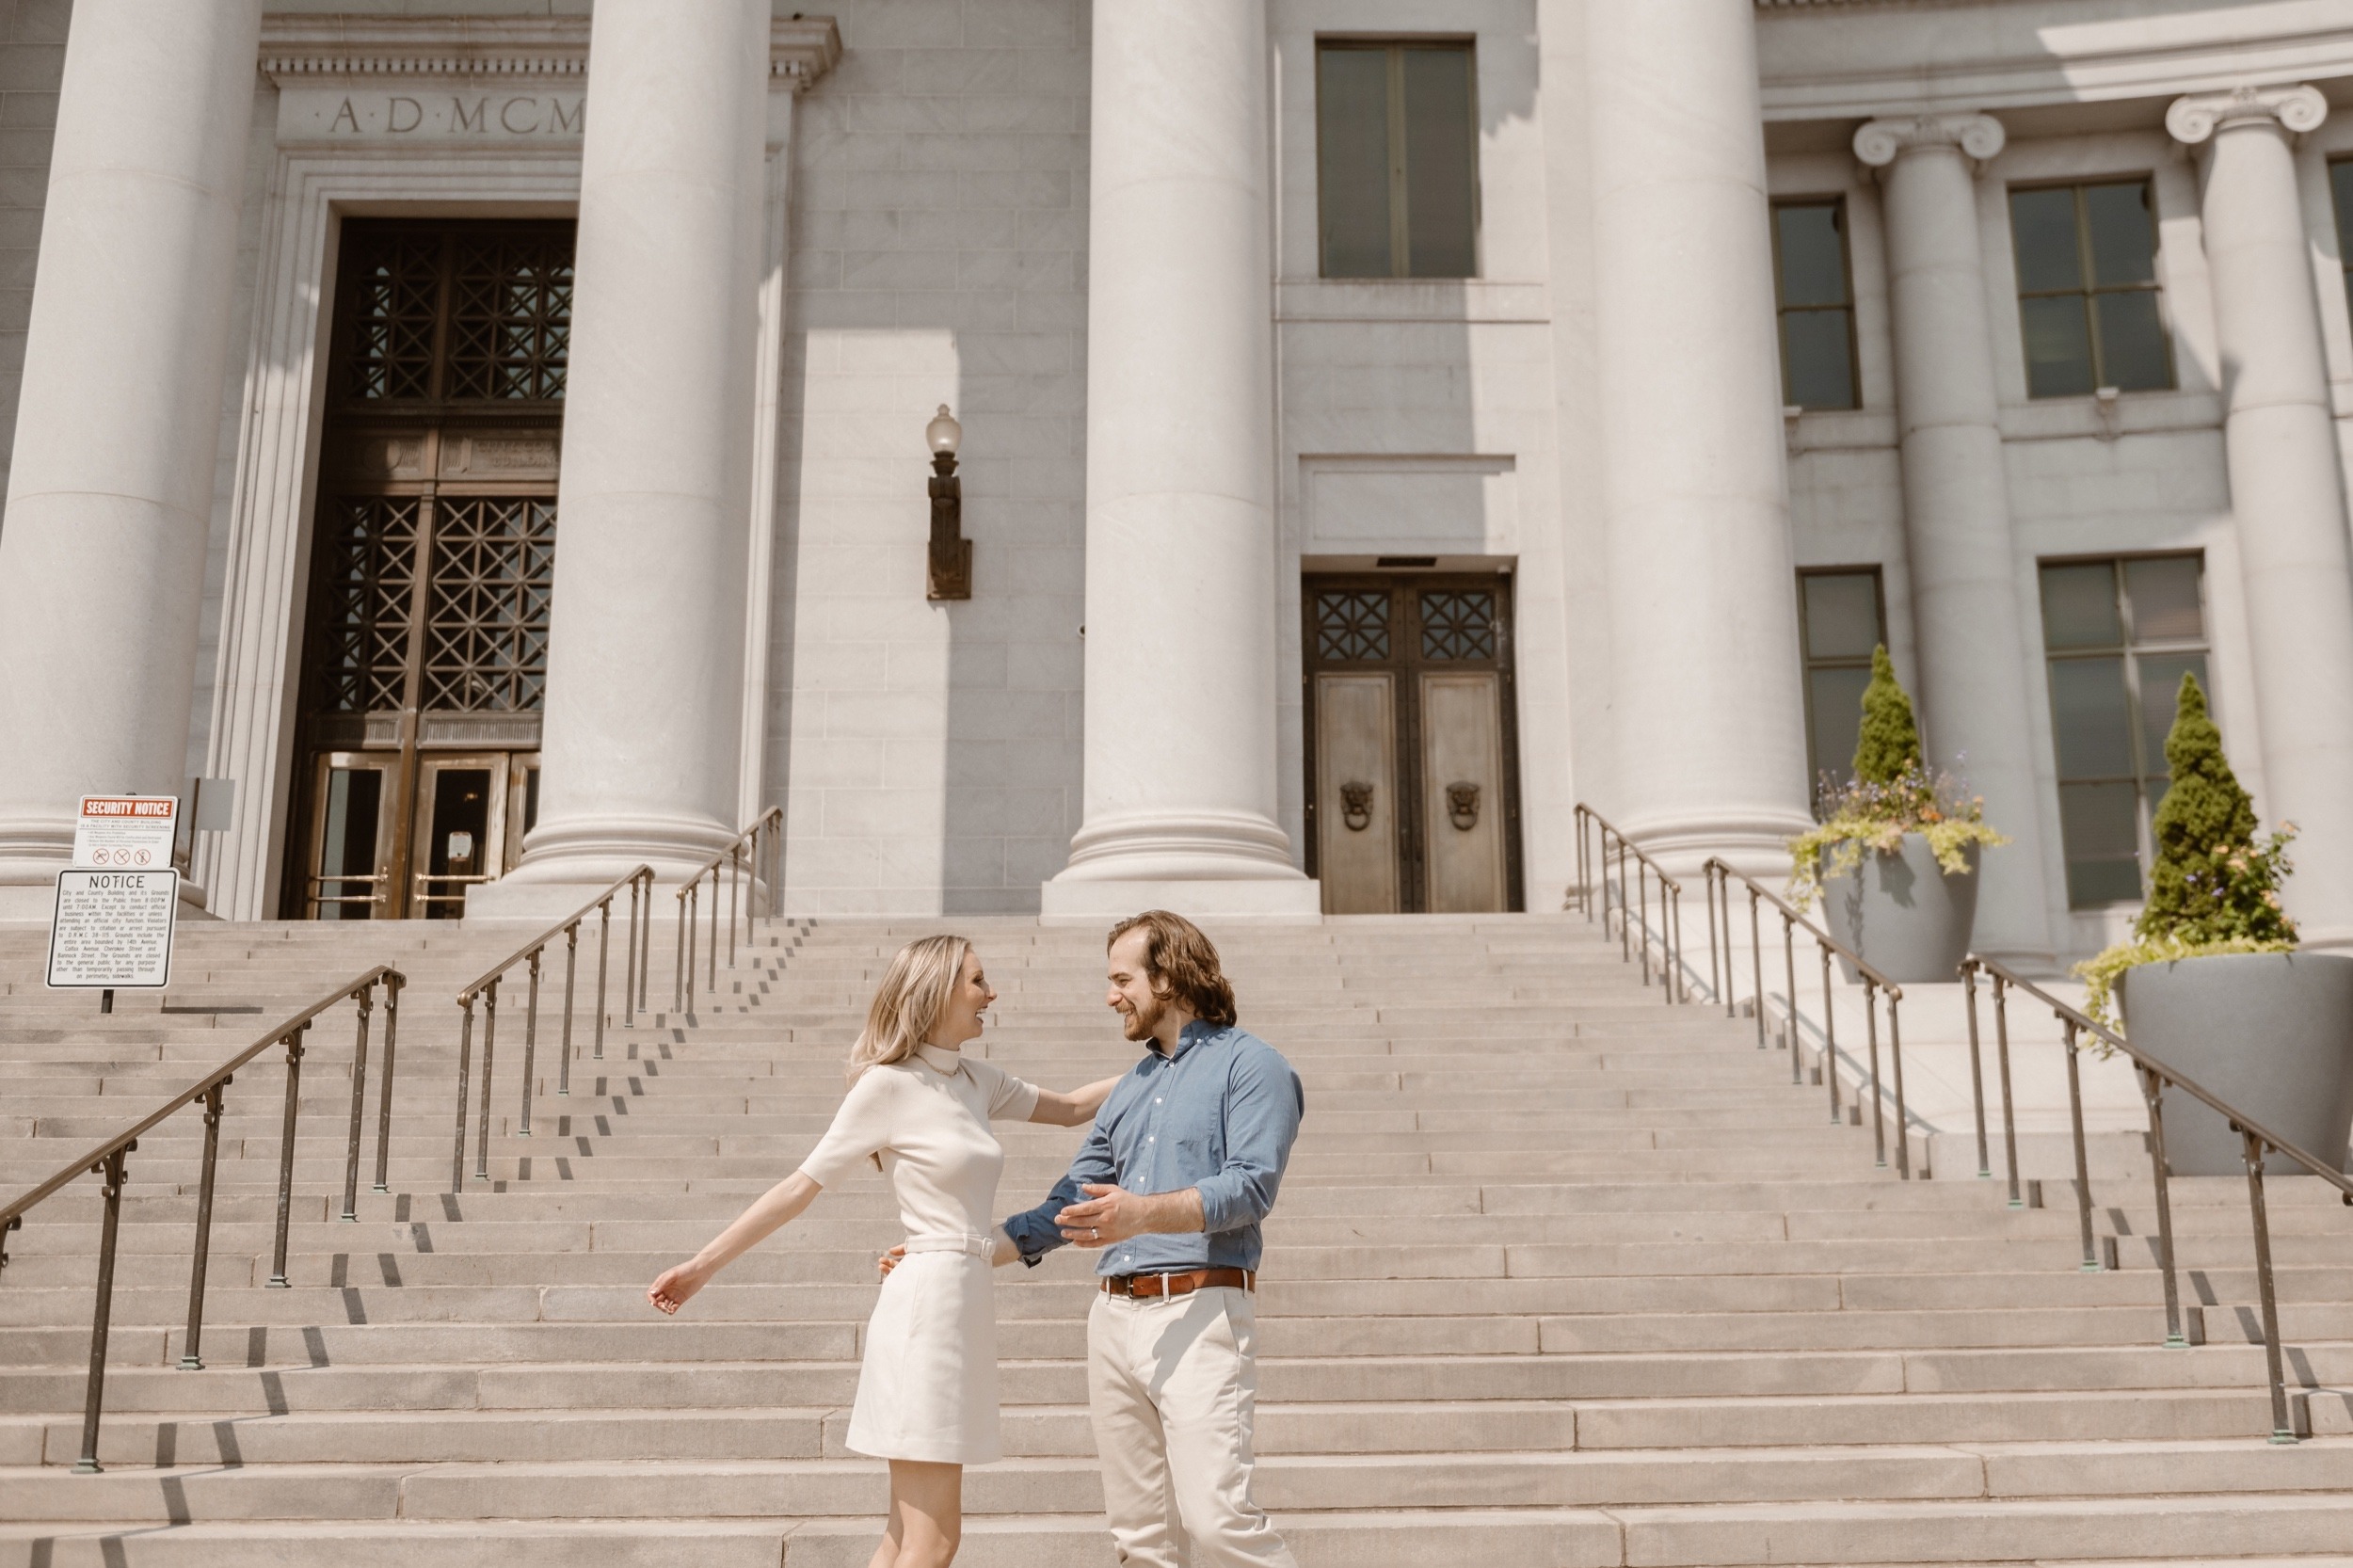 Courthouse wedding in downtown Denver for a Colorado elopement couple. Photo by Denver elopement photographer Ashley Joyce Photography, copyright 2022.